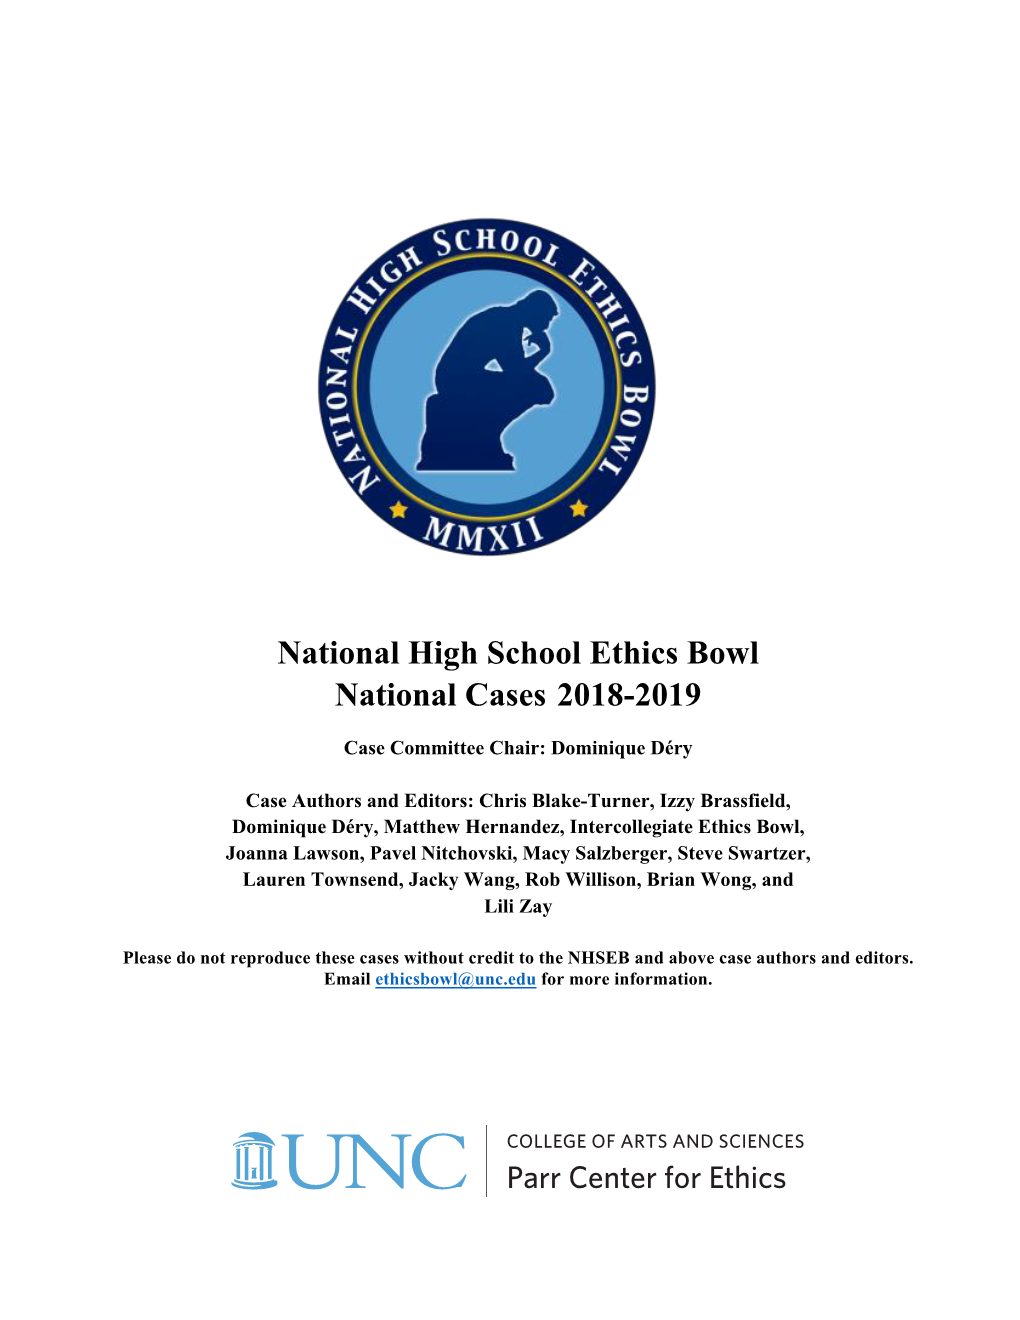 National High School Ethics Bowl National Cases 2018-2019